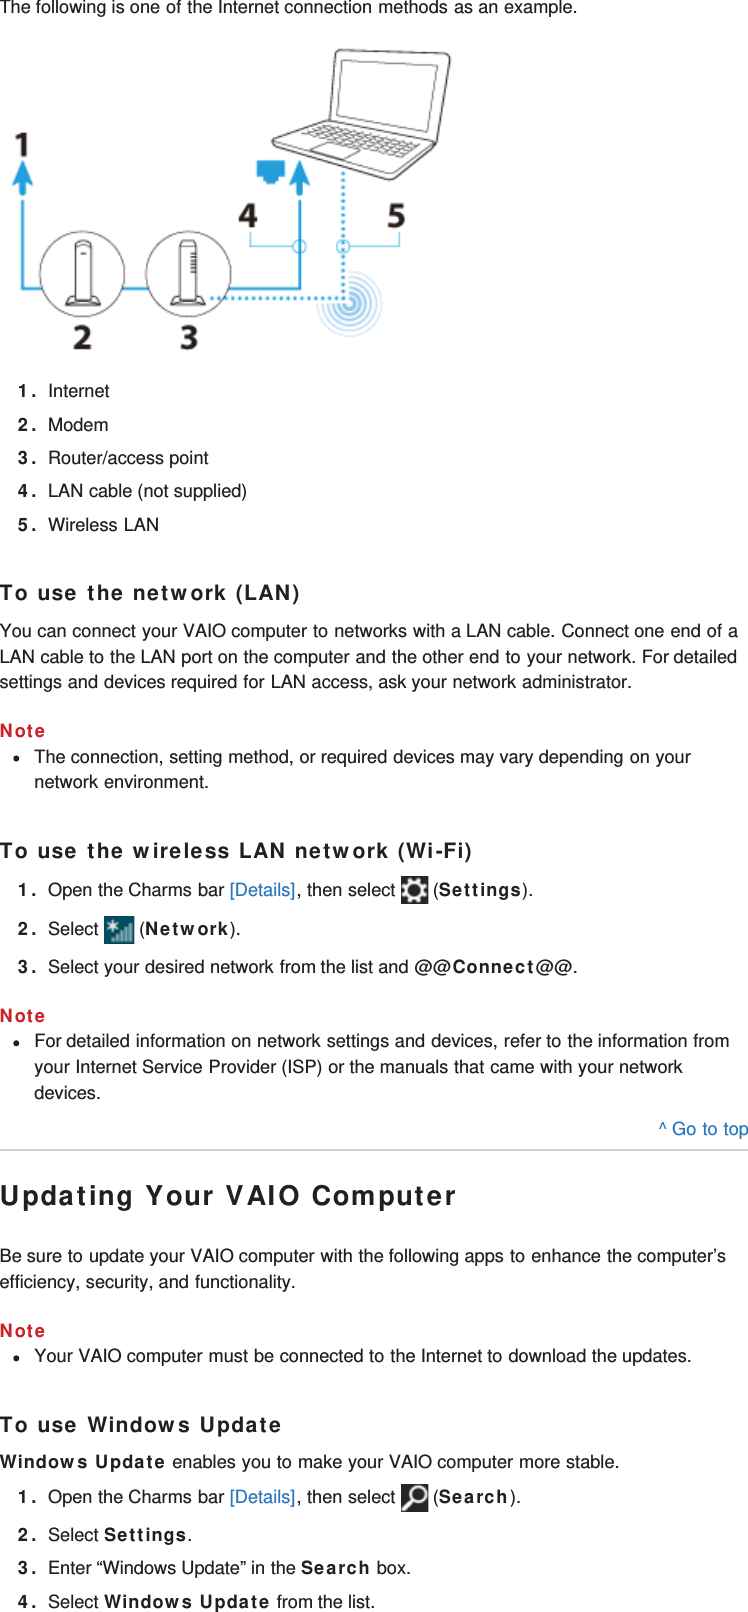 The following is one of the Internet connection methods as an example.1. Internet2. Modem3. Router/access point4. LAN cable (not supplied)5. Wireless LANTo use the network (LAN)You can connect your VAIO computer to networks with a LAN cable. Connect one end of aLAN cable to the LAN port on the computer and the other end to your network. For detailedsettings and devices required for LAN access, ask your network administrator.NoteThe connection, setting method, or required devices may vary depending on yournetwork environment.To use the wireless LAN network (Wi-Fi)1. Open the Charms bar [Details], then select   (Settings).2. Select   (Network).3. Select your desired network from the list and @@Connect@@.NoteFor detailed information on network settings and devices, refer to the information fromyour Internet Service Provider (ISP) or the manuals that came with your networkdevices.^ Go to topUpdating Your VAIO ComputerBe sure to update your VAIO computer with the following apps to enhance the computer’sefficiency, security, and functionality.NoteYour VAIO computer must be connected to the Internet to download the updates.To use Windows UpdateWindows Update enables you to make your VAIO computer more stable.1. Open the Charms bar [Details], then select   (Search).2. Select Settings.3. Enter “Windows Update” in the Search box.4. Select Windows Update from the list.